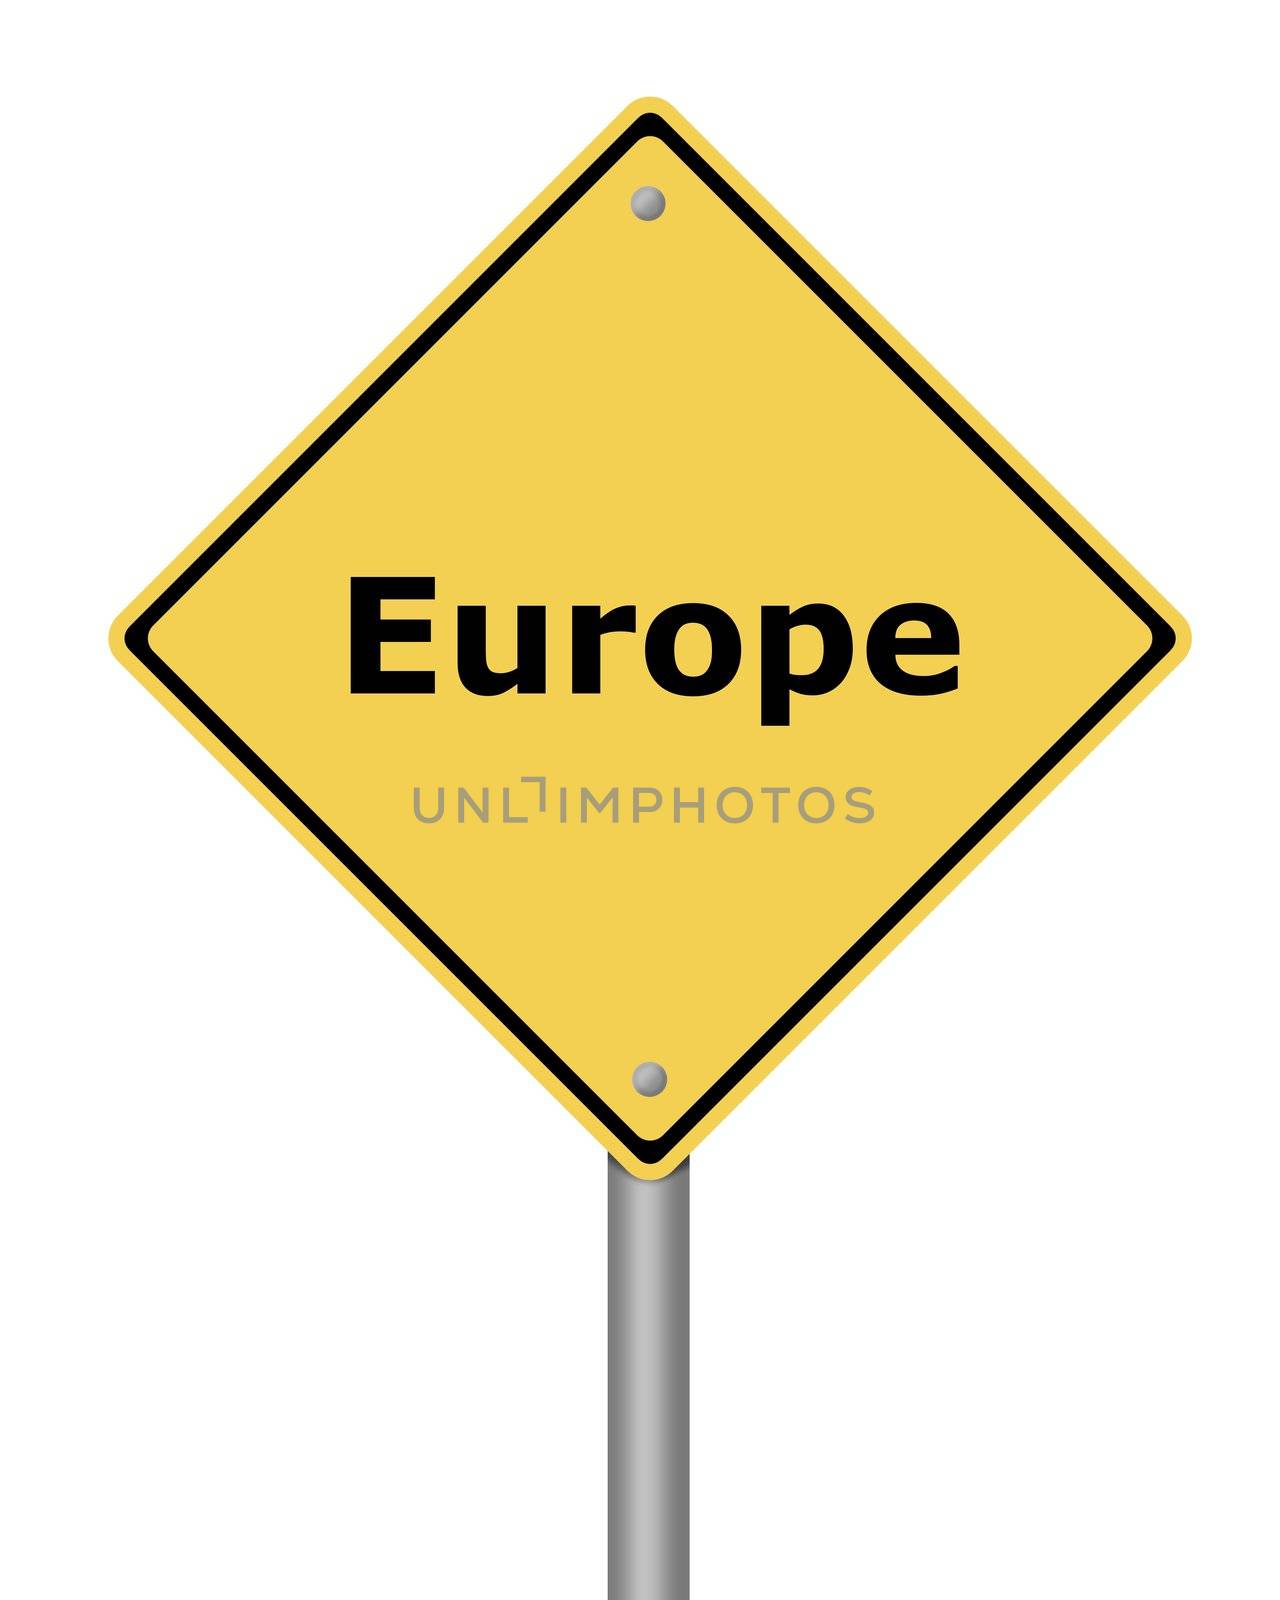 Yellow warning sign on white background with the text Europe